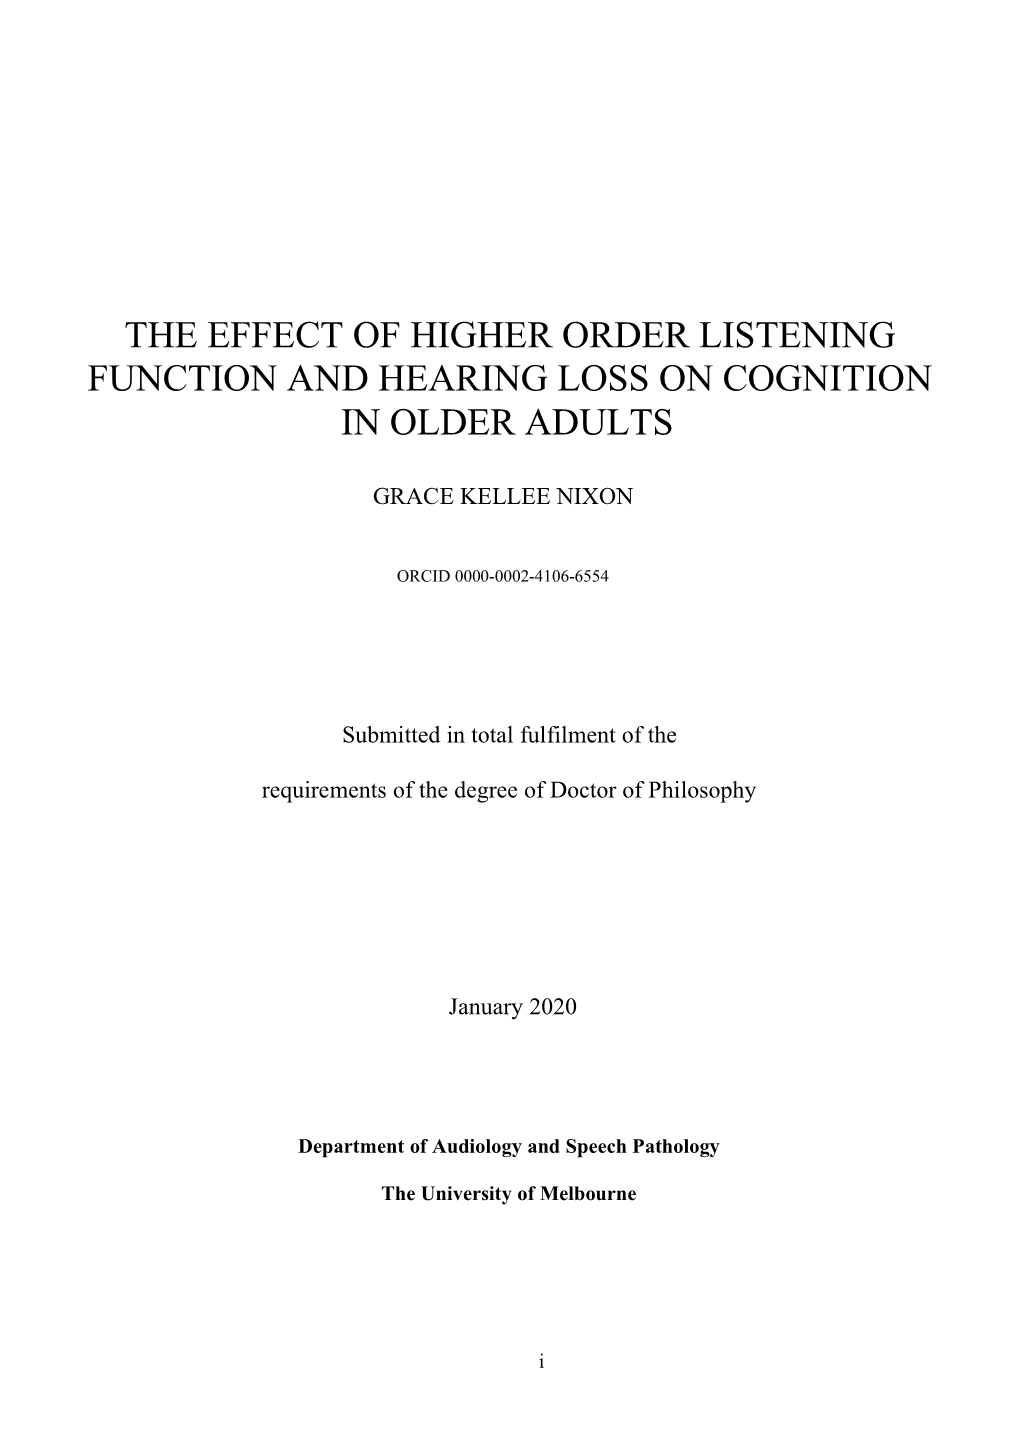 The Effect of Higher Order Listening Function and Hearing Loss on Cognition